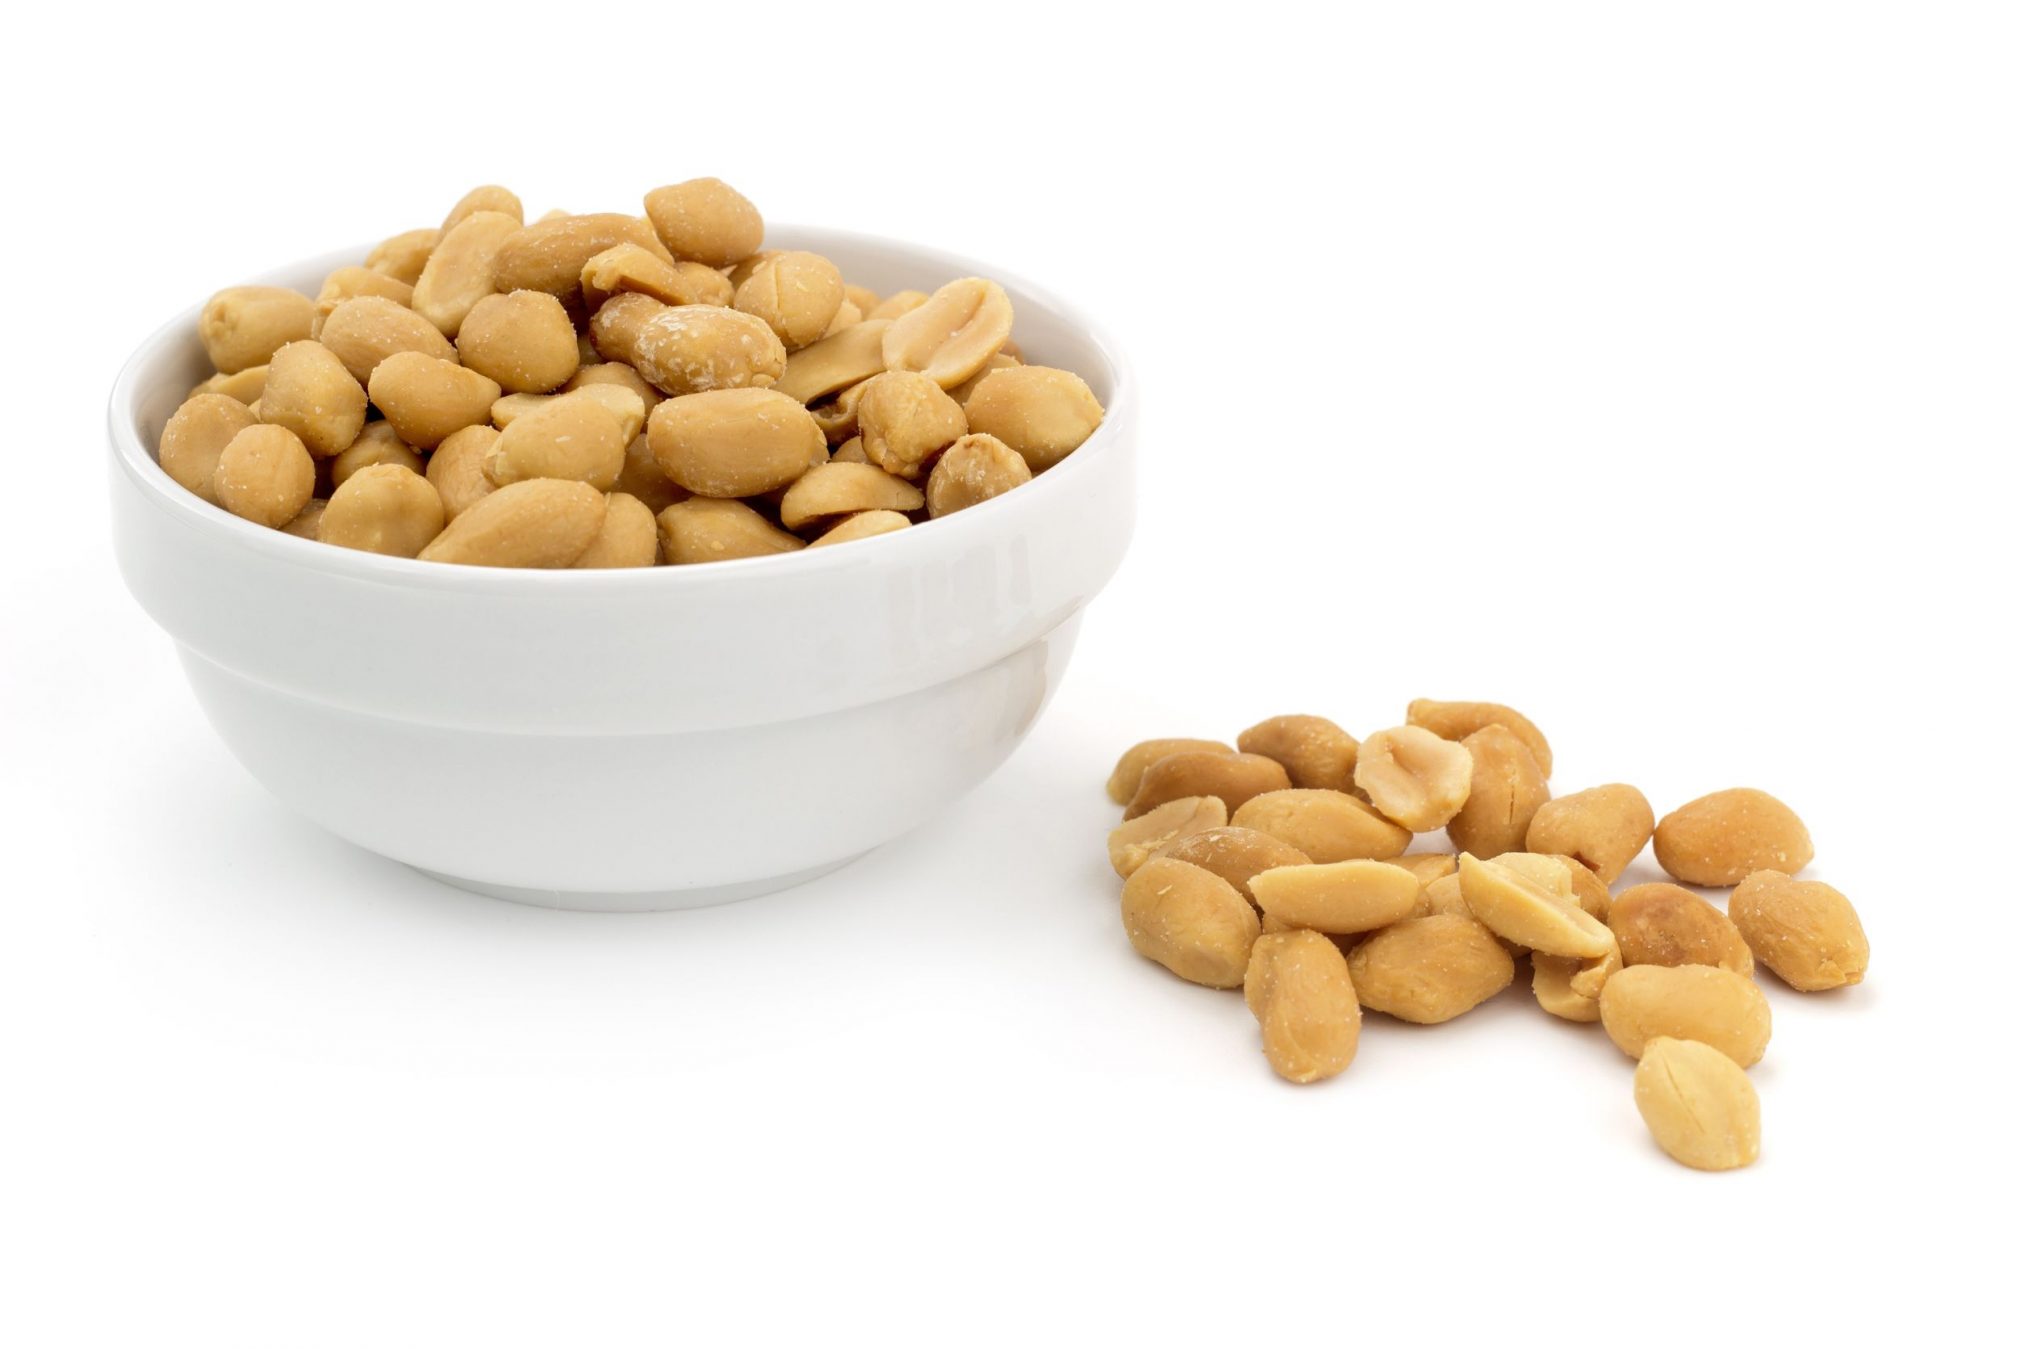 6450840 - bowl of shelled peanuts on white background